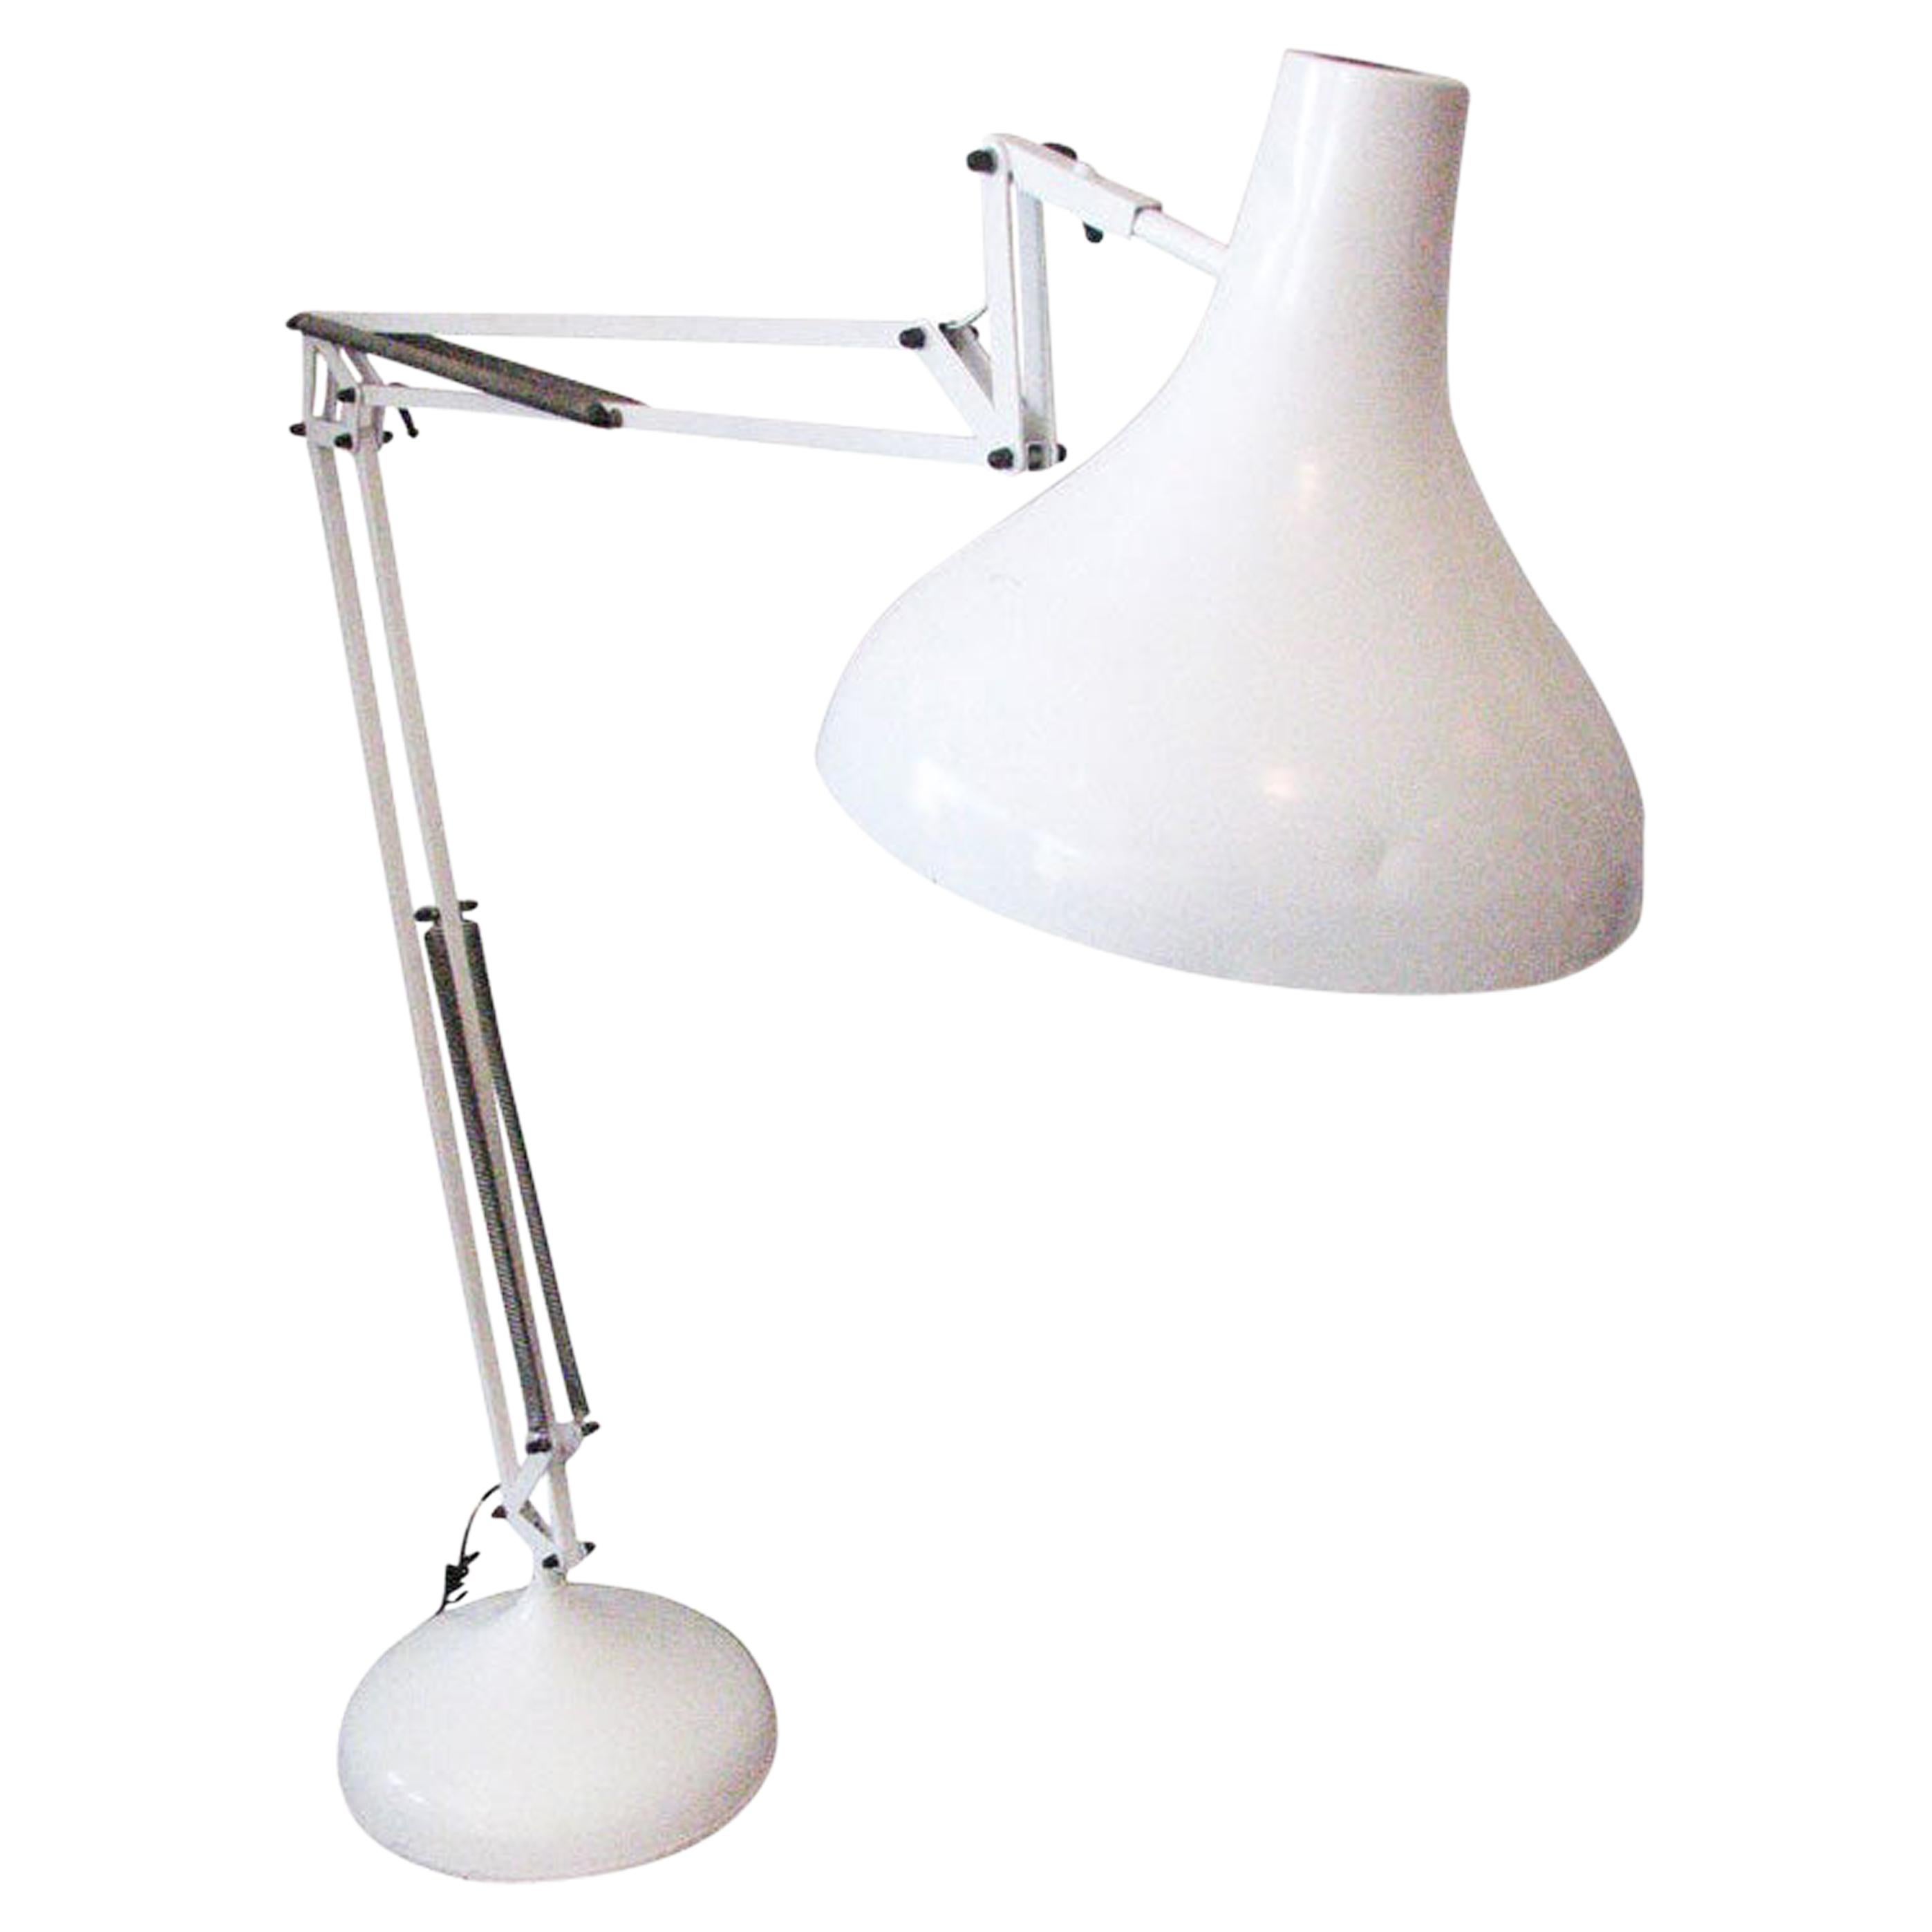 Giant Adjustable "Max" Floor Lamp by Max Inc. For Sale